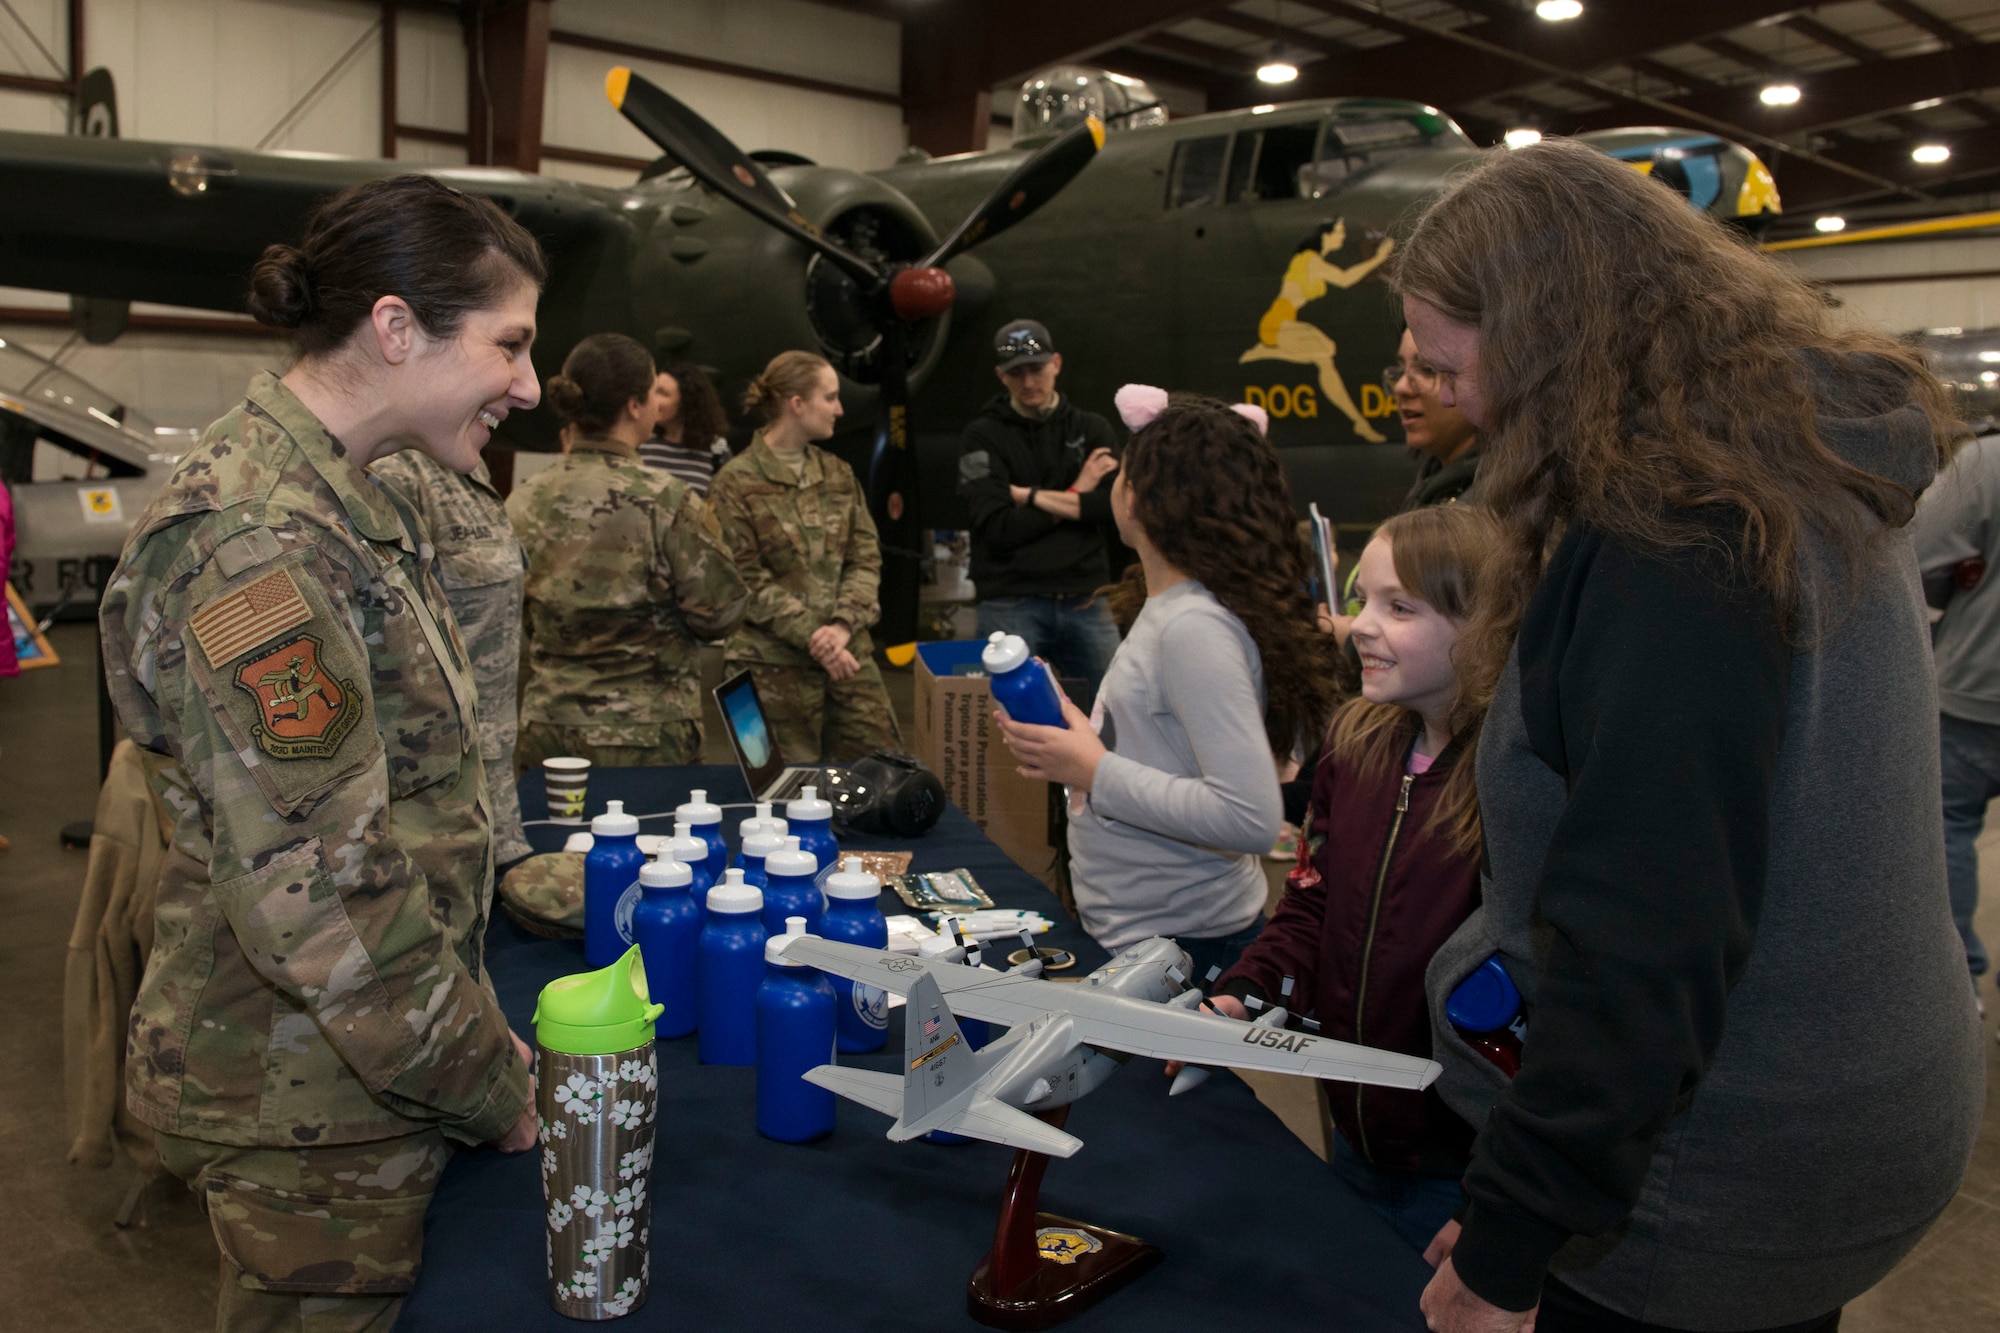 Air Force Capt. Jennifer Artiaco speaks with a girl about the Air National Guard at the annual "Women Take Flight" event held at the New England Air Museum, Windsor Locks, Connecticut, March 7, 2020. "Women Take Flight" is targeted toward girls who are interested in avionics and other STEM related fields.(U.S. Air National Guard photo by Tech. Sgt. Tamara R. Dabney)